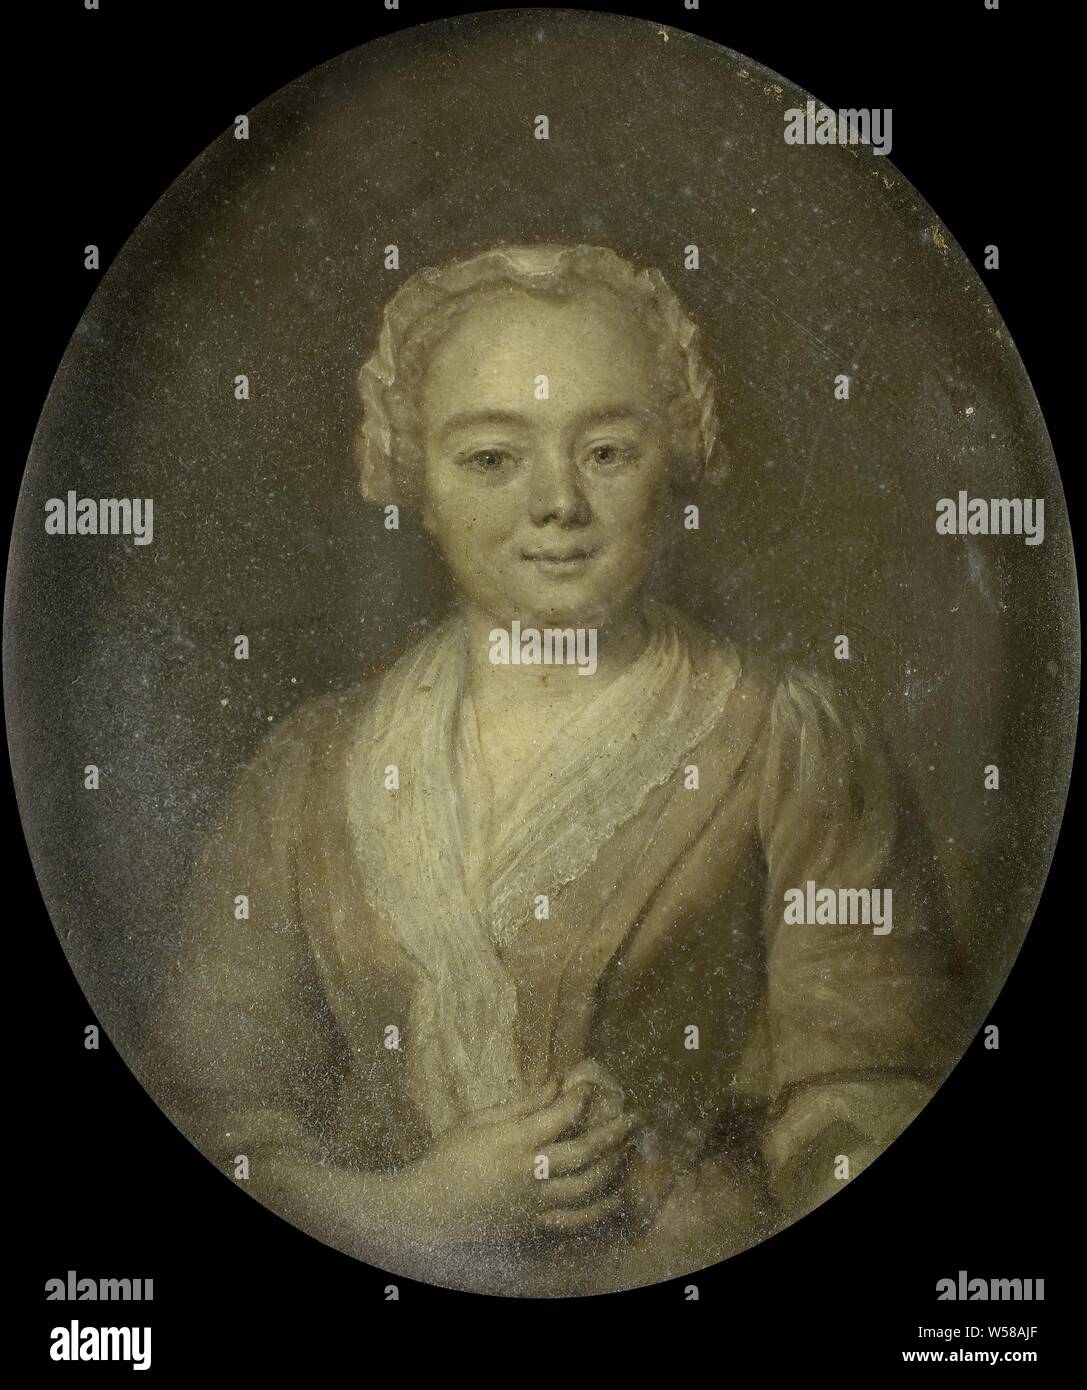 Portrait of Margaretha van Leuvenigh, Wife or Bernardus de Bosch, Portrait of Margaretha van Leuvenigh (1705-85), wife of Bernardus de Bosch. Half in one oval, the right hand in front of the belly., Jan Maurits Quinkhard, 1743, copper (metal), oil paint (paint), h 11 cm × w 9.5 cm h 20.5 cm × w 17.7 cm × d 2 cm Stock Photo